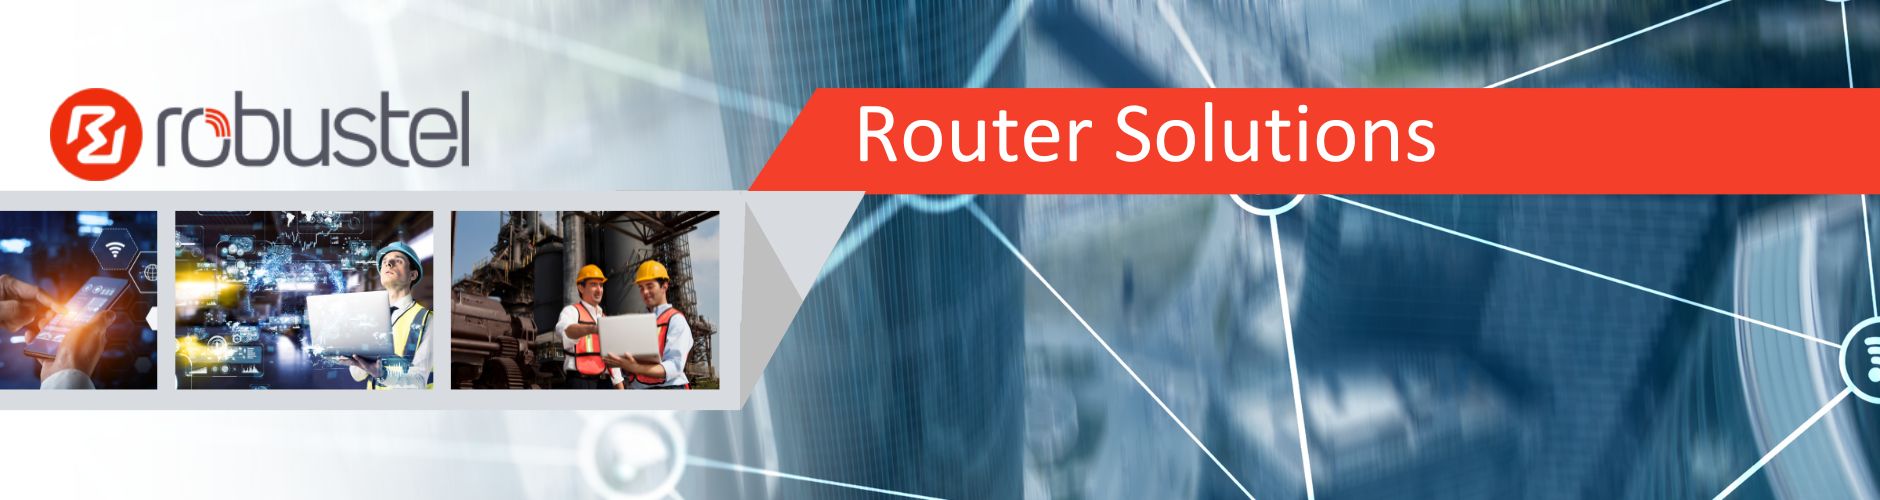 Robustel Router Solutions